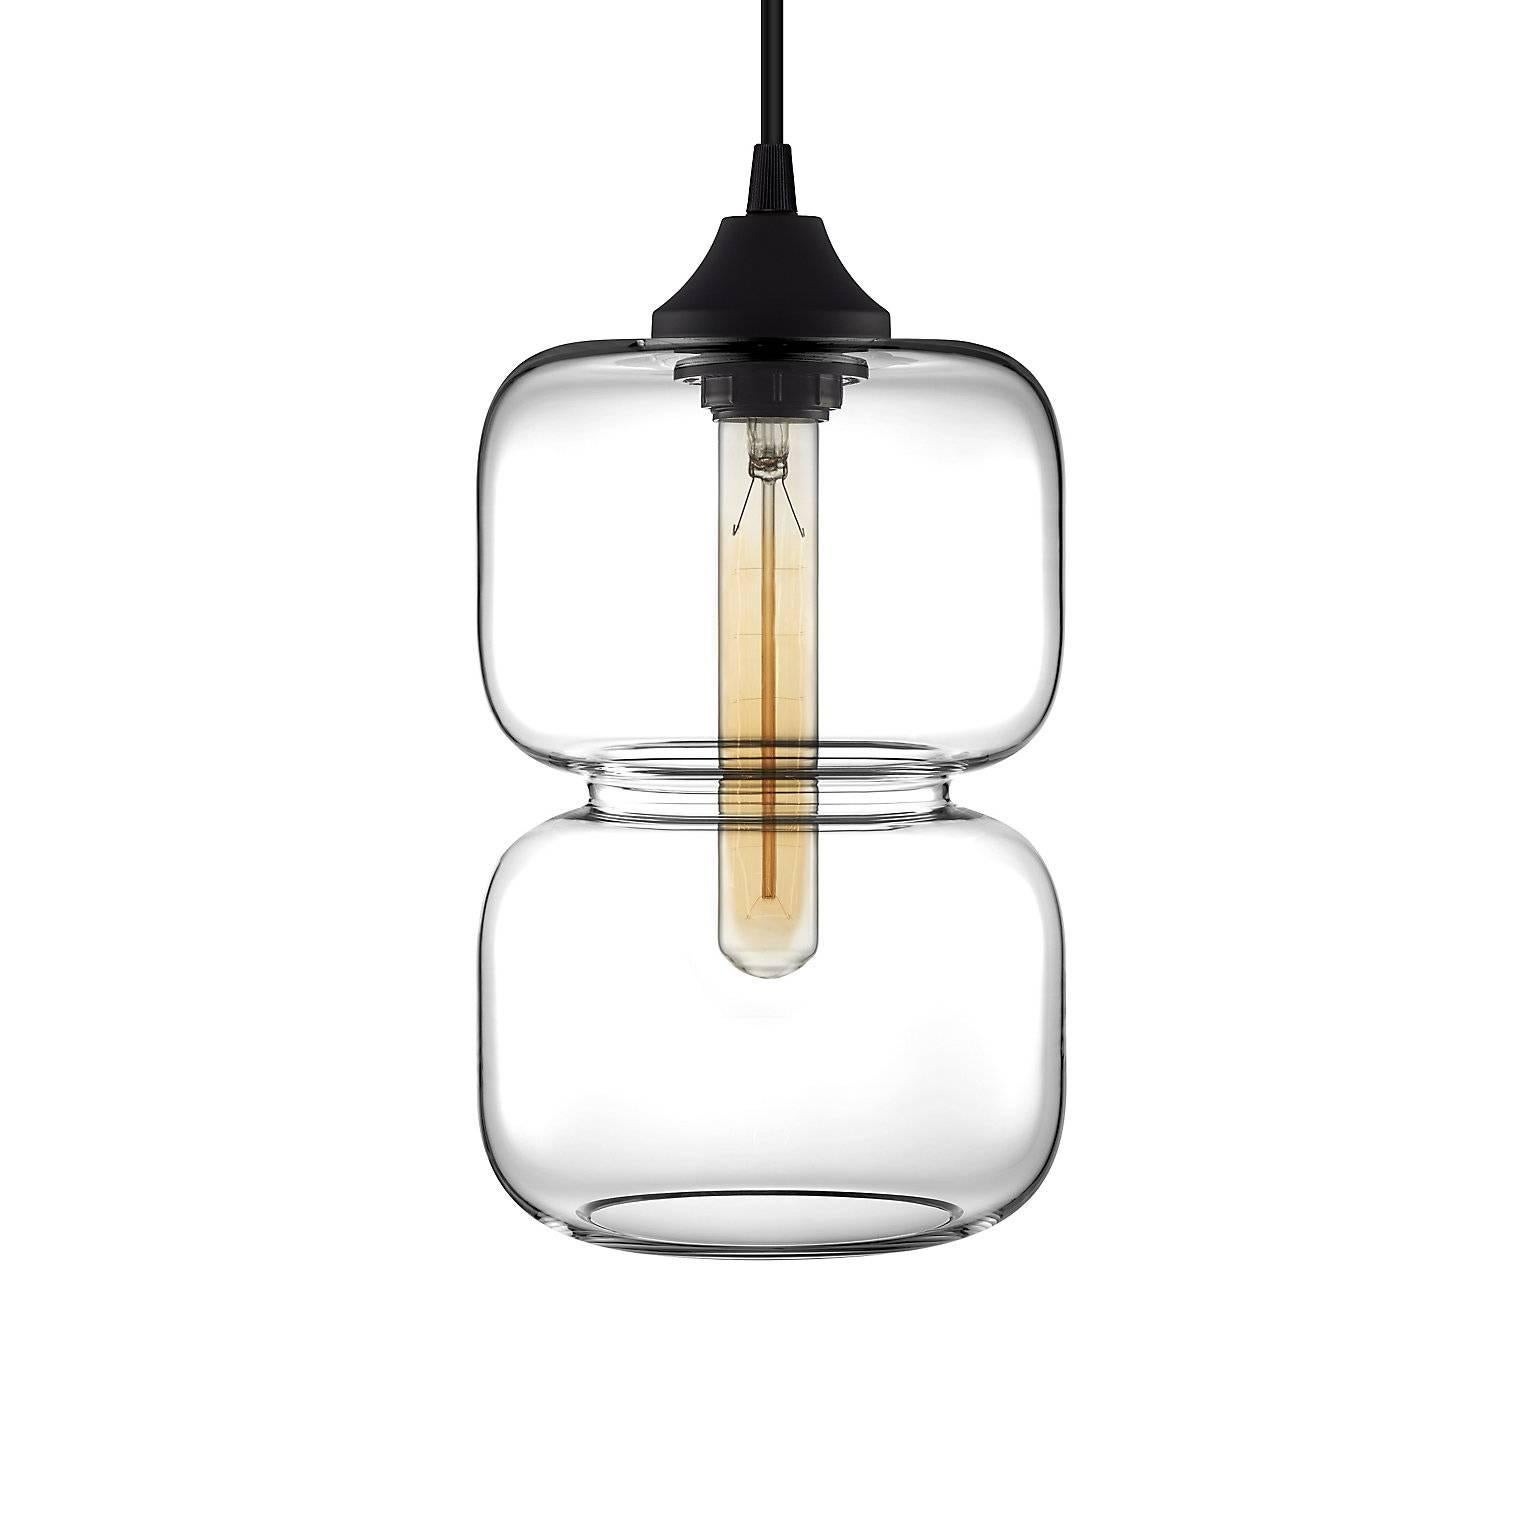 Blending the elements of shapes and hues, the curvaceous Pinch pendant brings playful balance and to any space. Every single glass pendant light that comes from Niche is handblown by real human beings in a state-of-the-art studio located in Beacon,